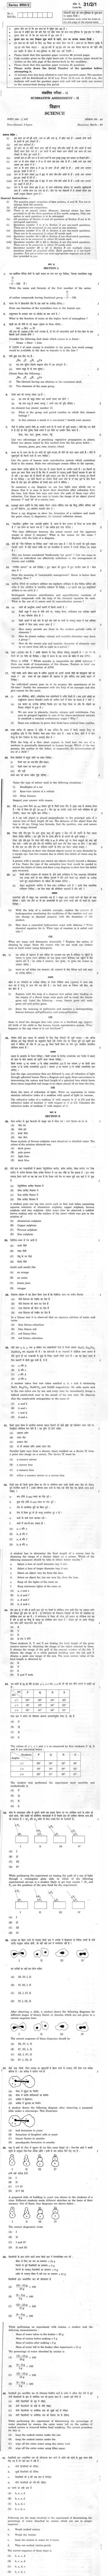 CBSE Class X Previous Year Question Papers 2012 Science